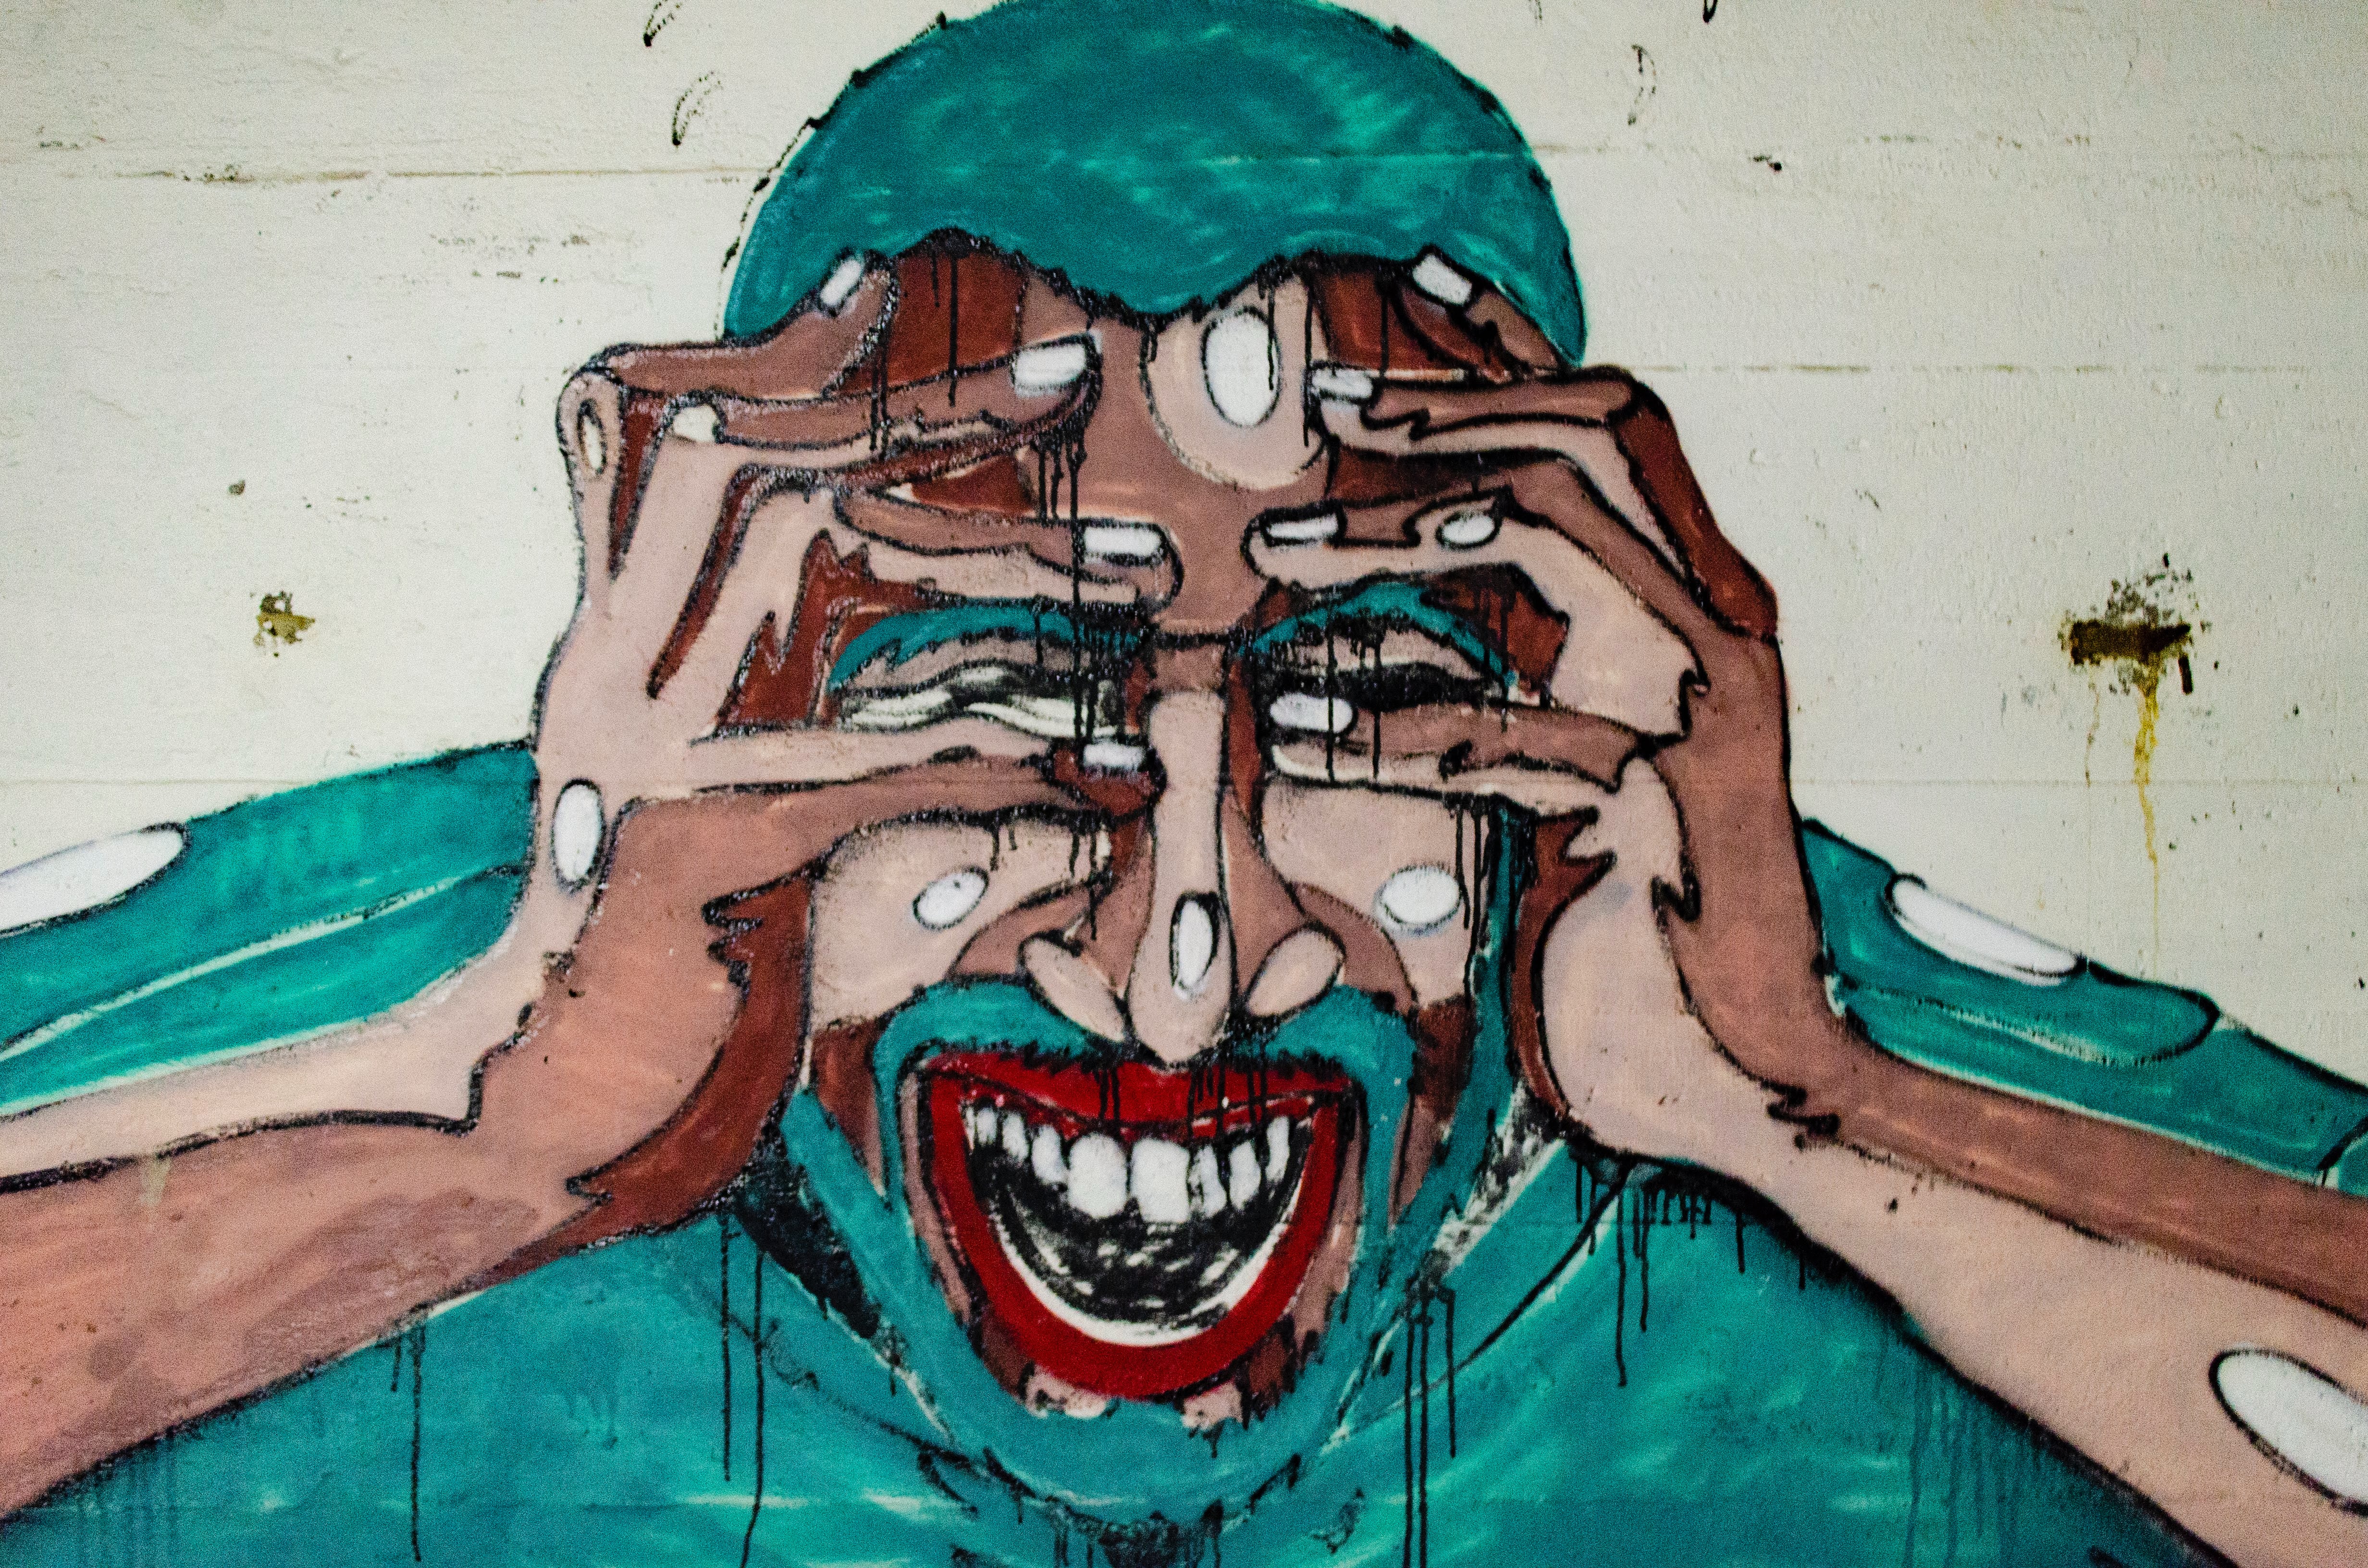 A mural painting of a man weeping